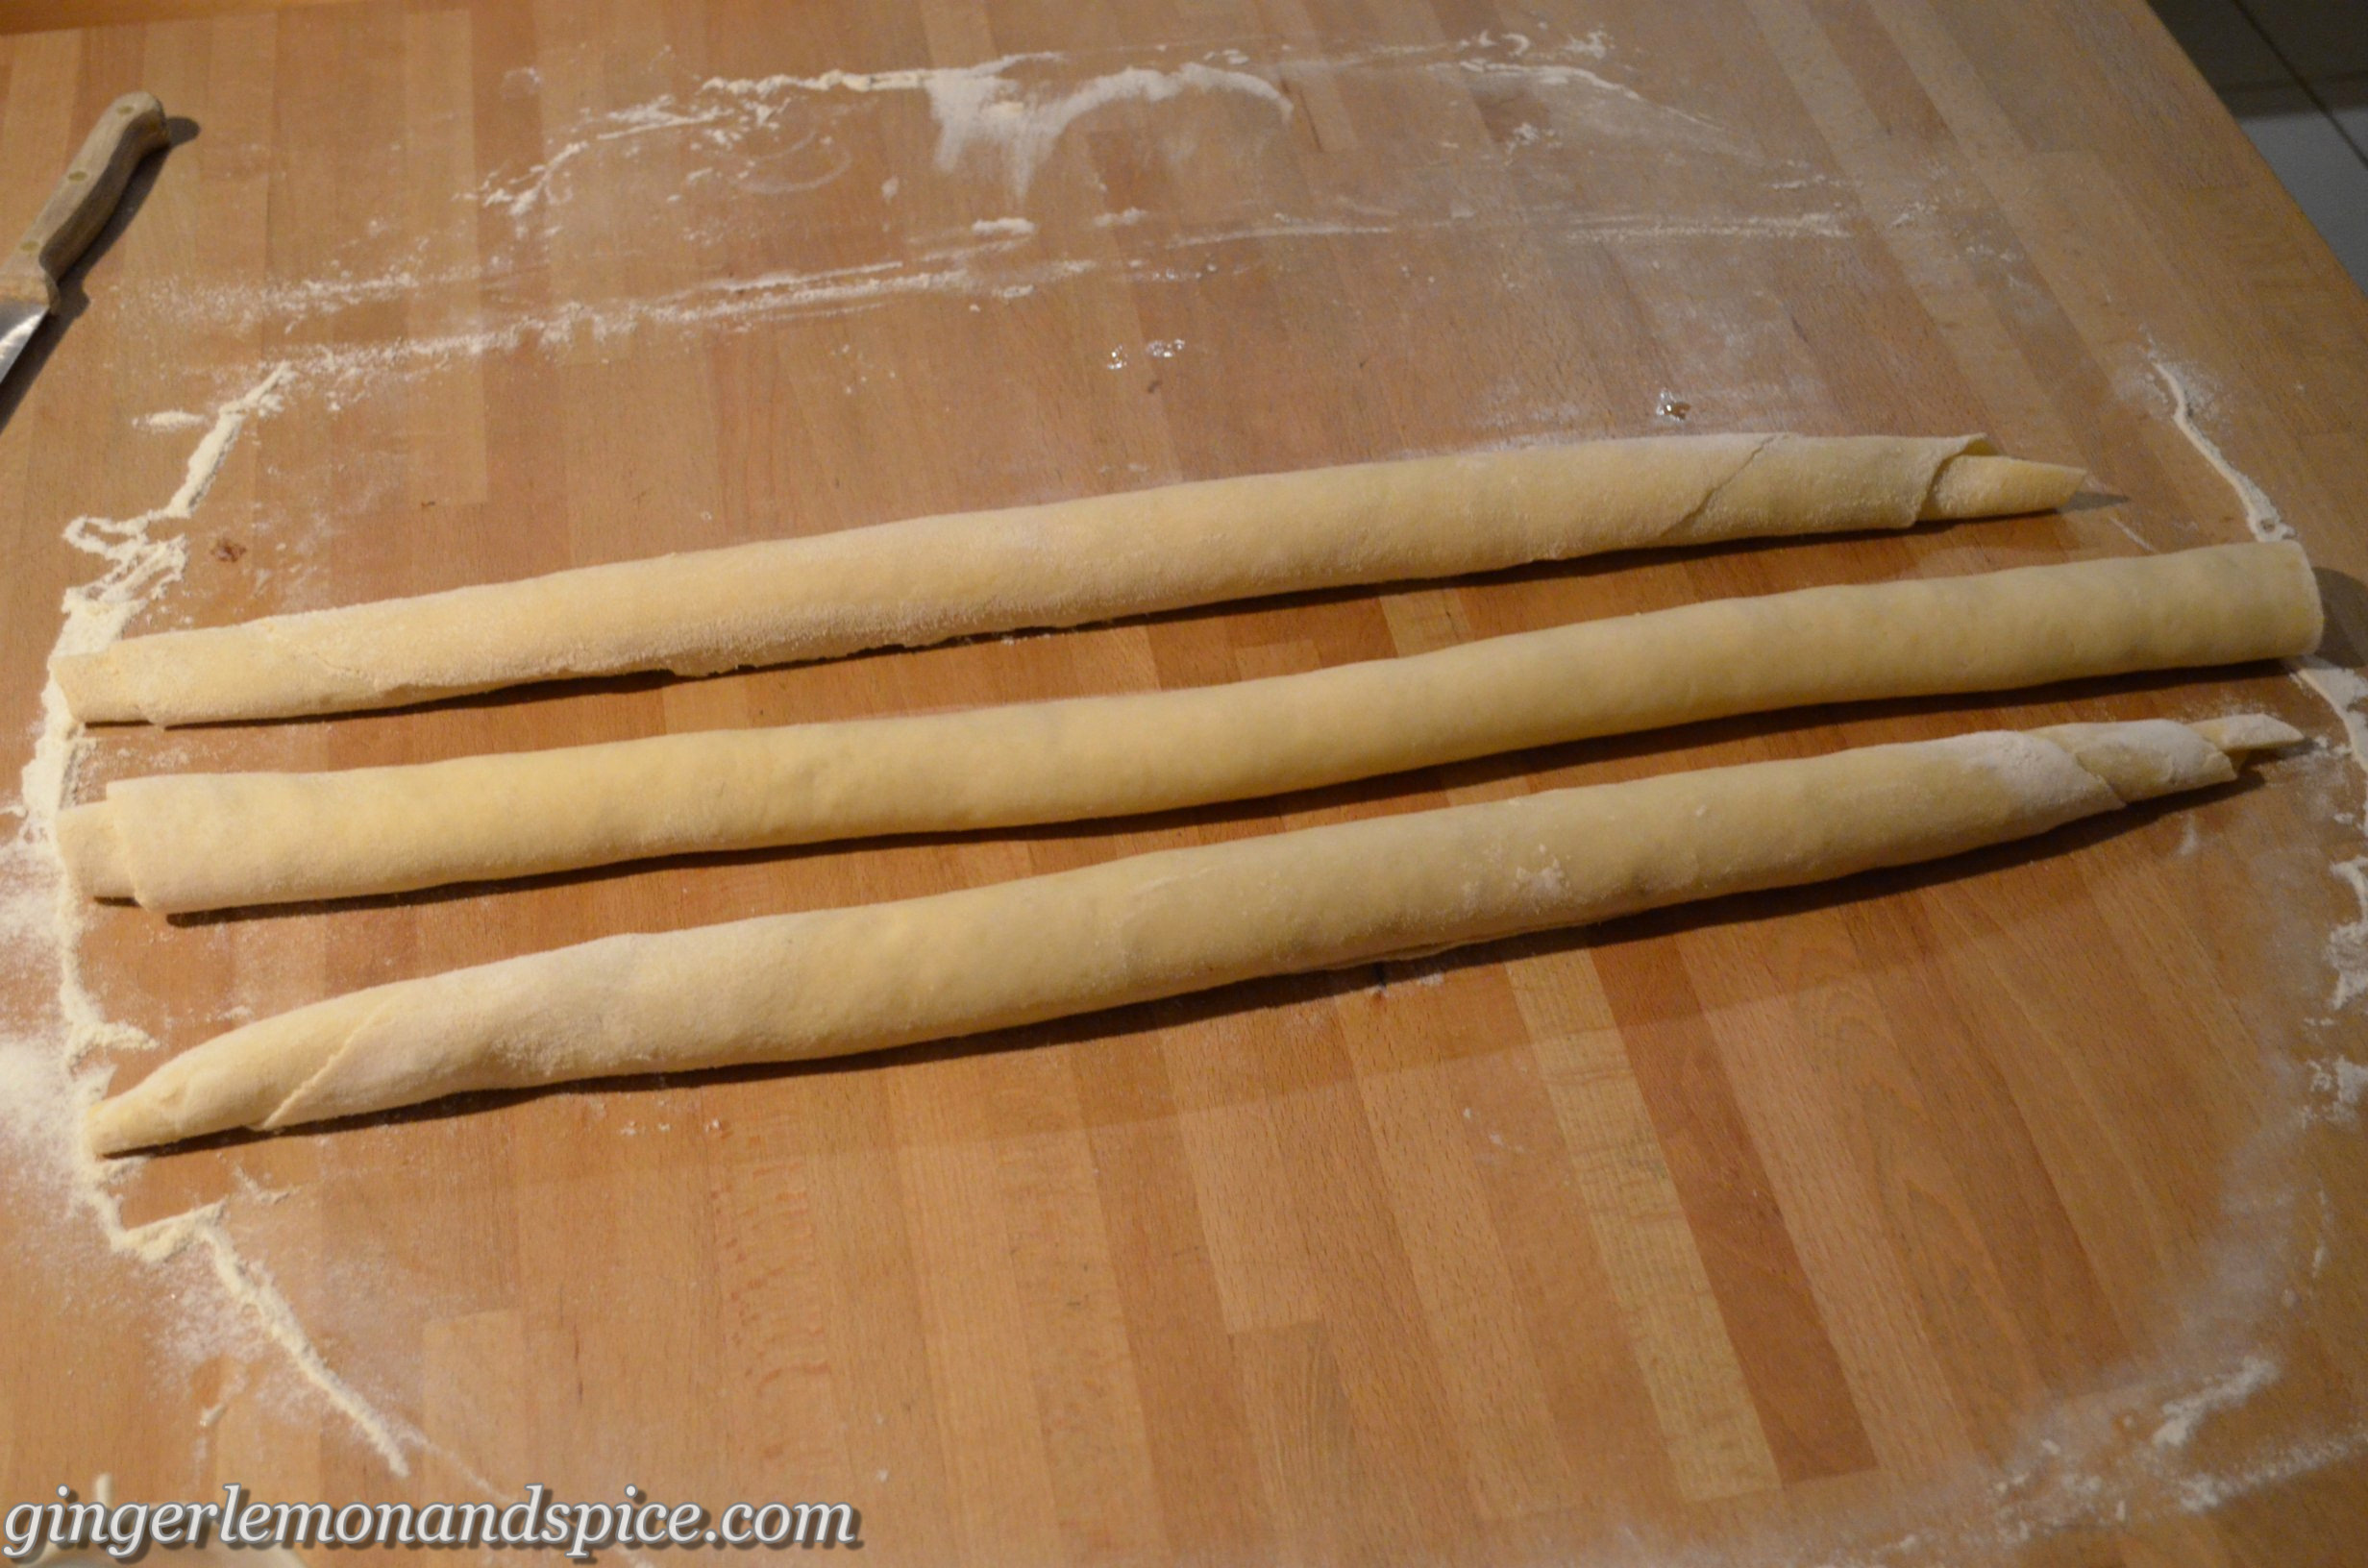 after the filling was distributed between the three parts and they were rolled up